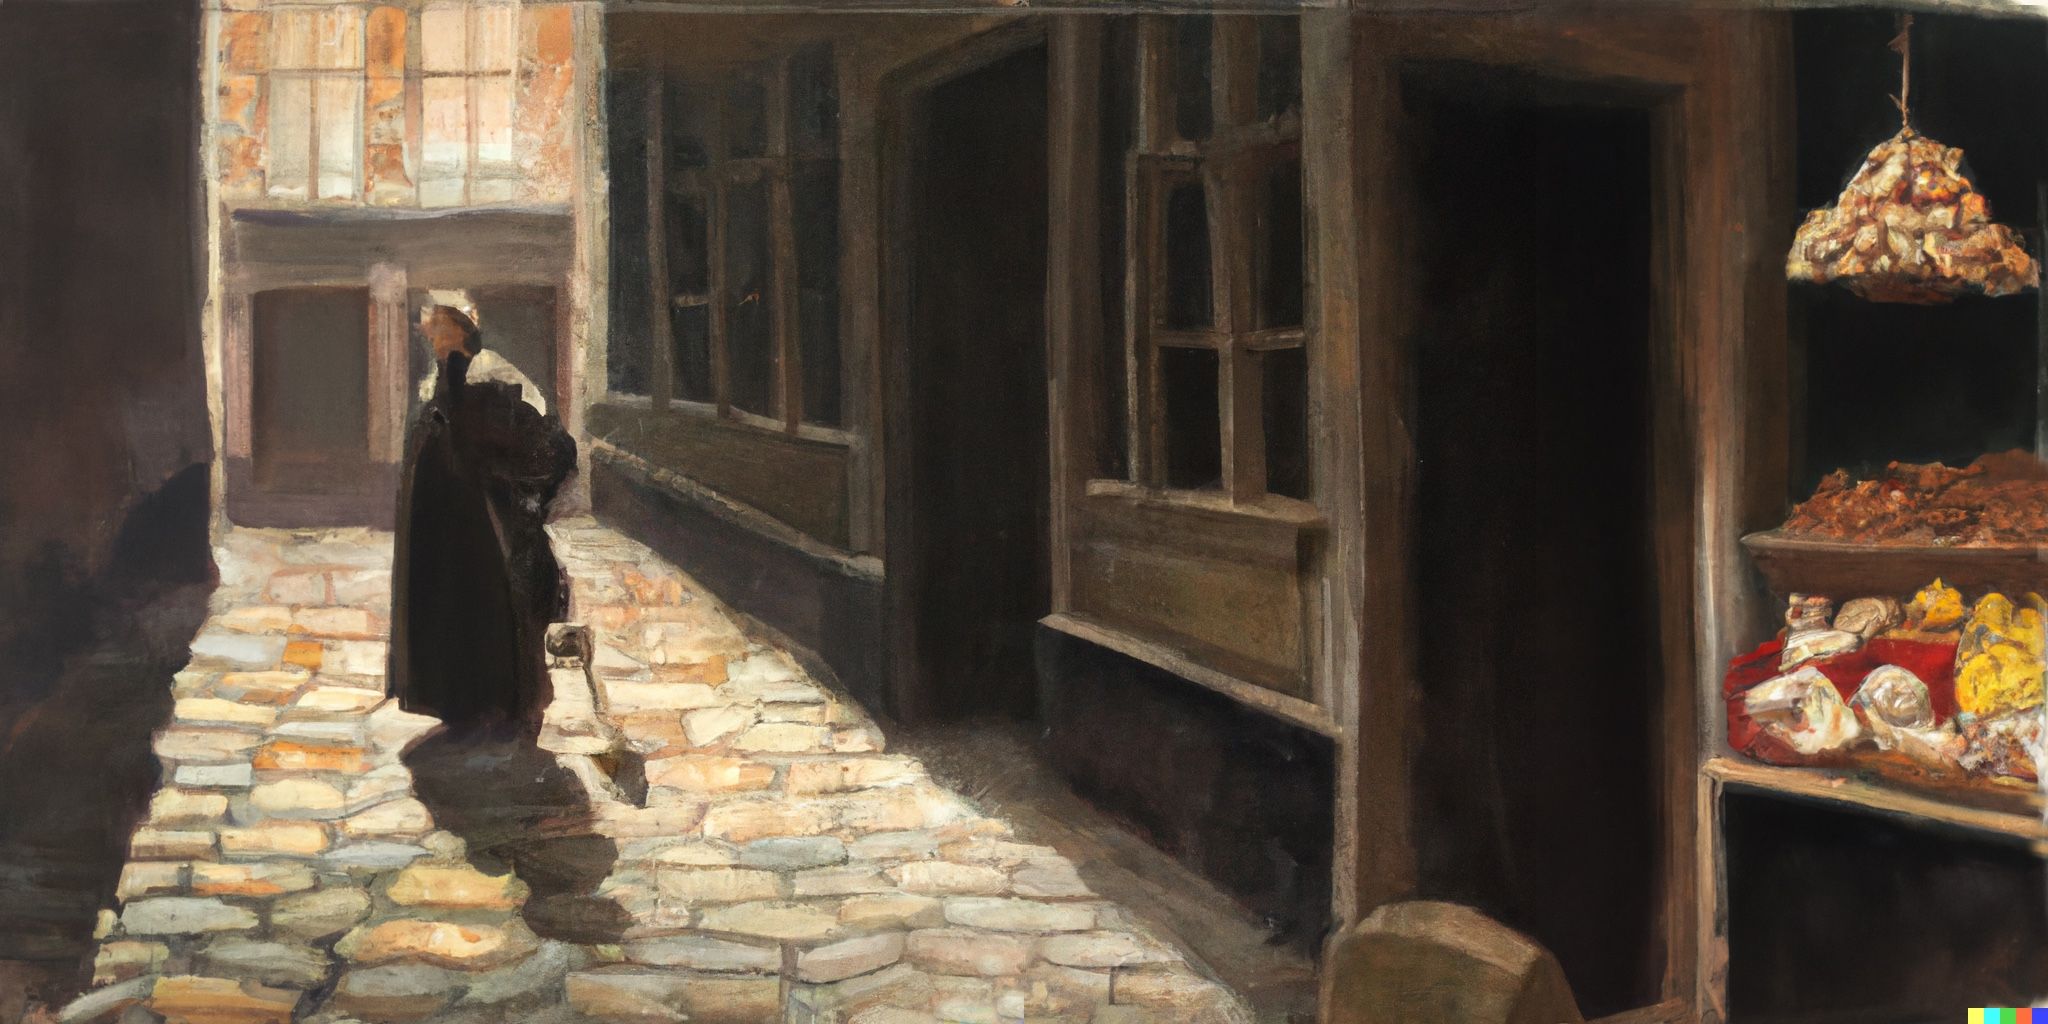 A menacing bald sailor stands to one side of a cobblestone street, holding a long bone spear. Rembrandt school, oil on canvas.